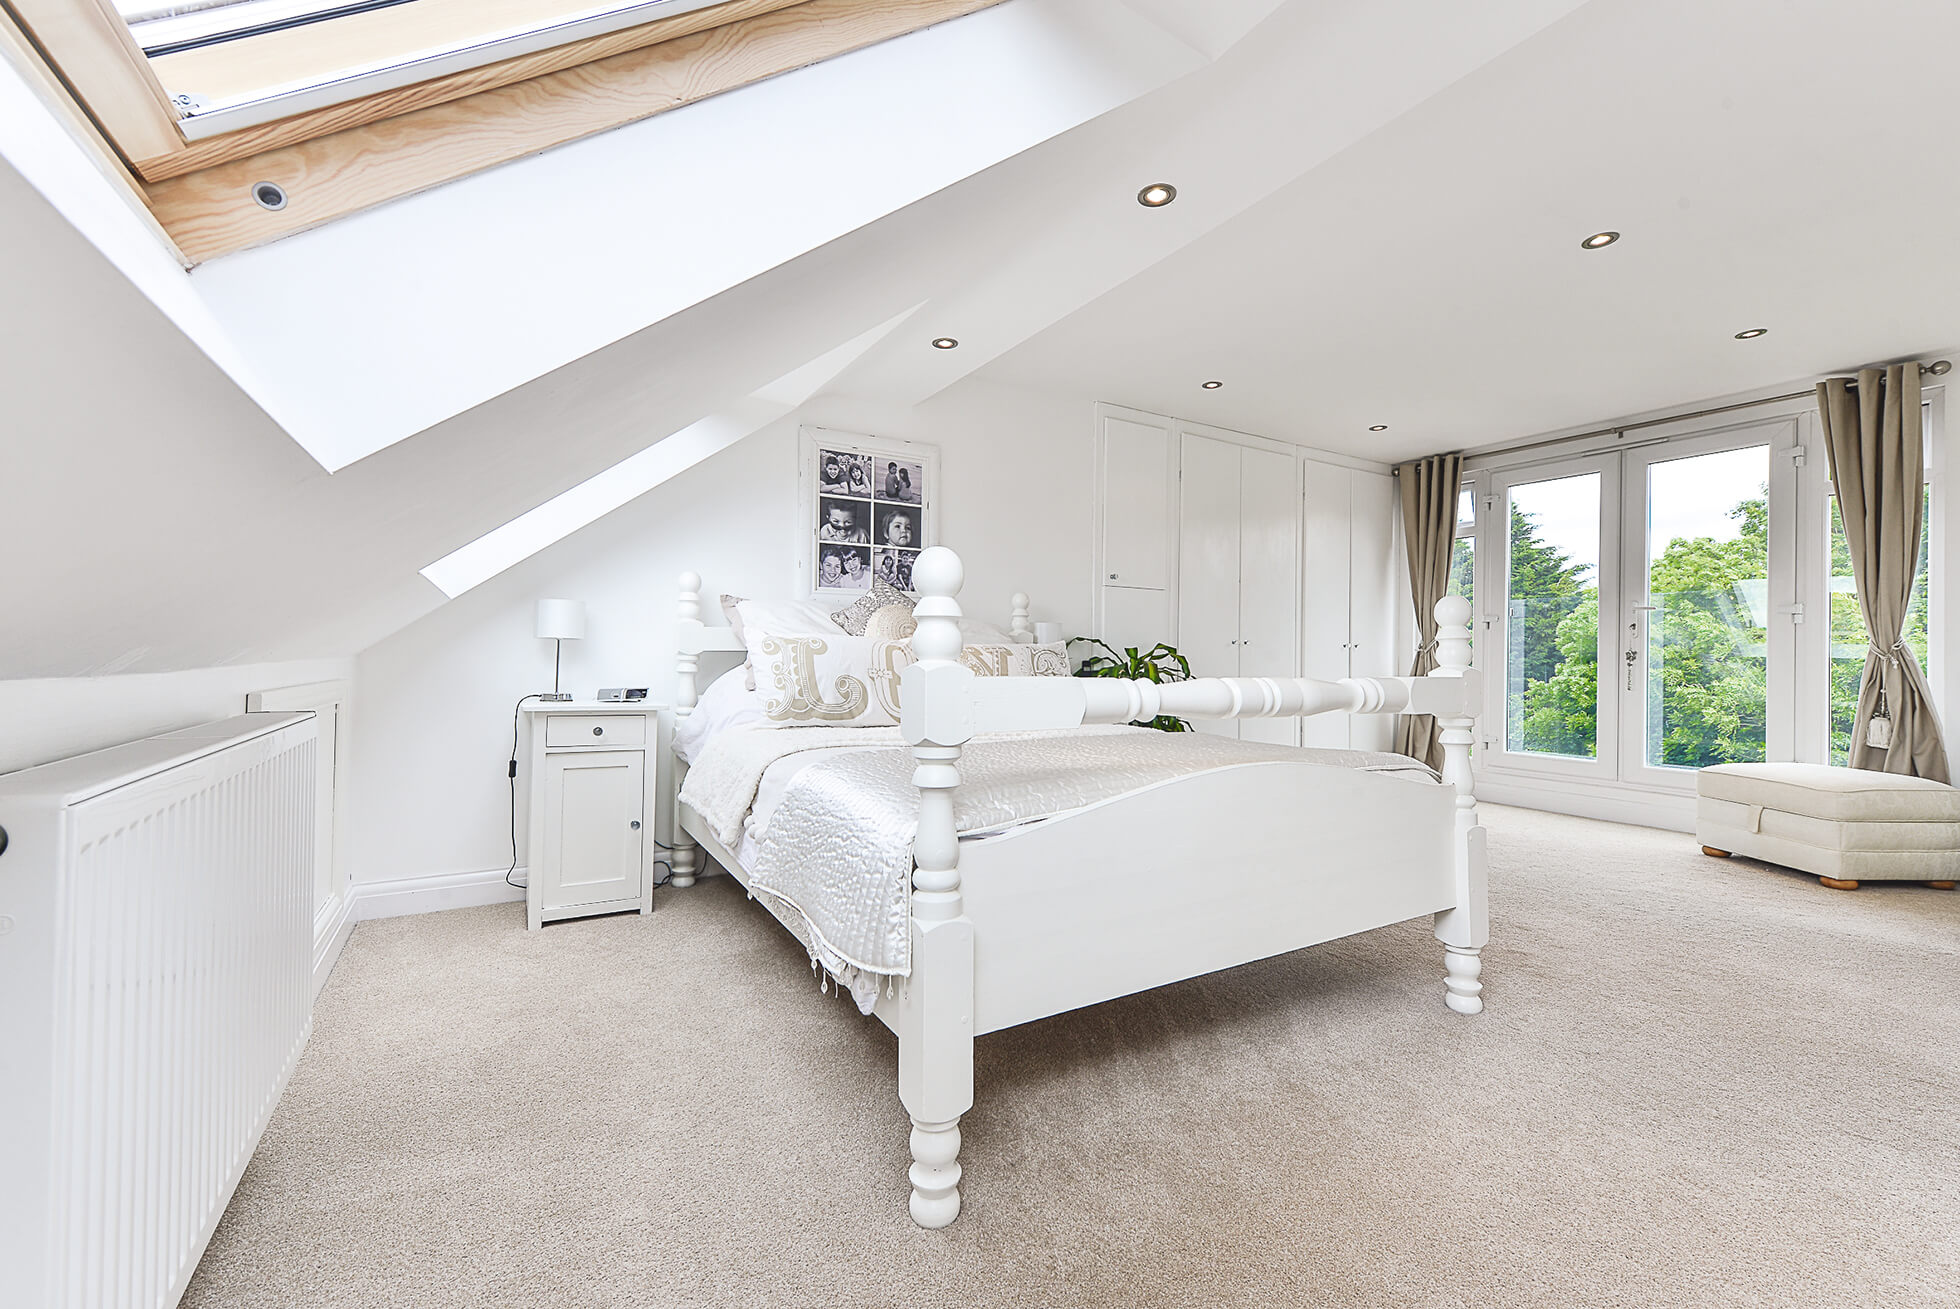 Do you have a question about converting your Loft in Cuffley? Here are the most popular questions asked by our clients.